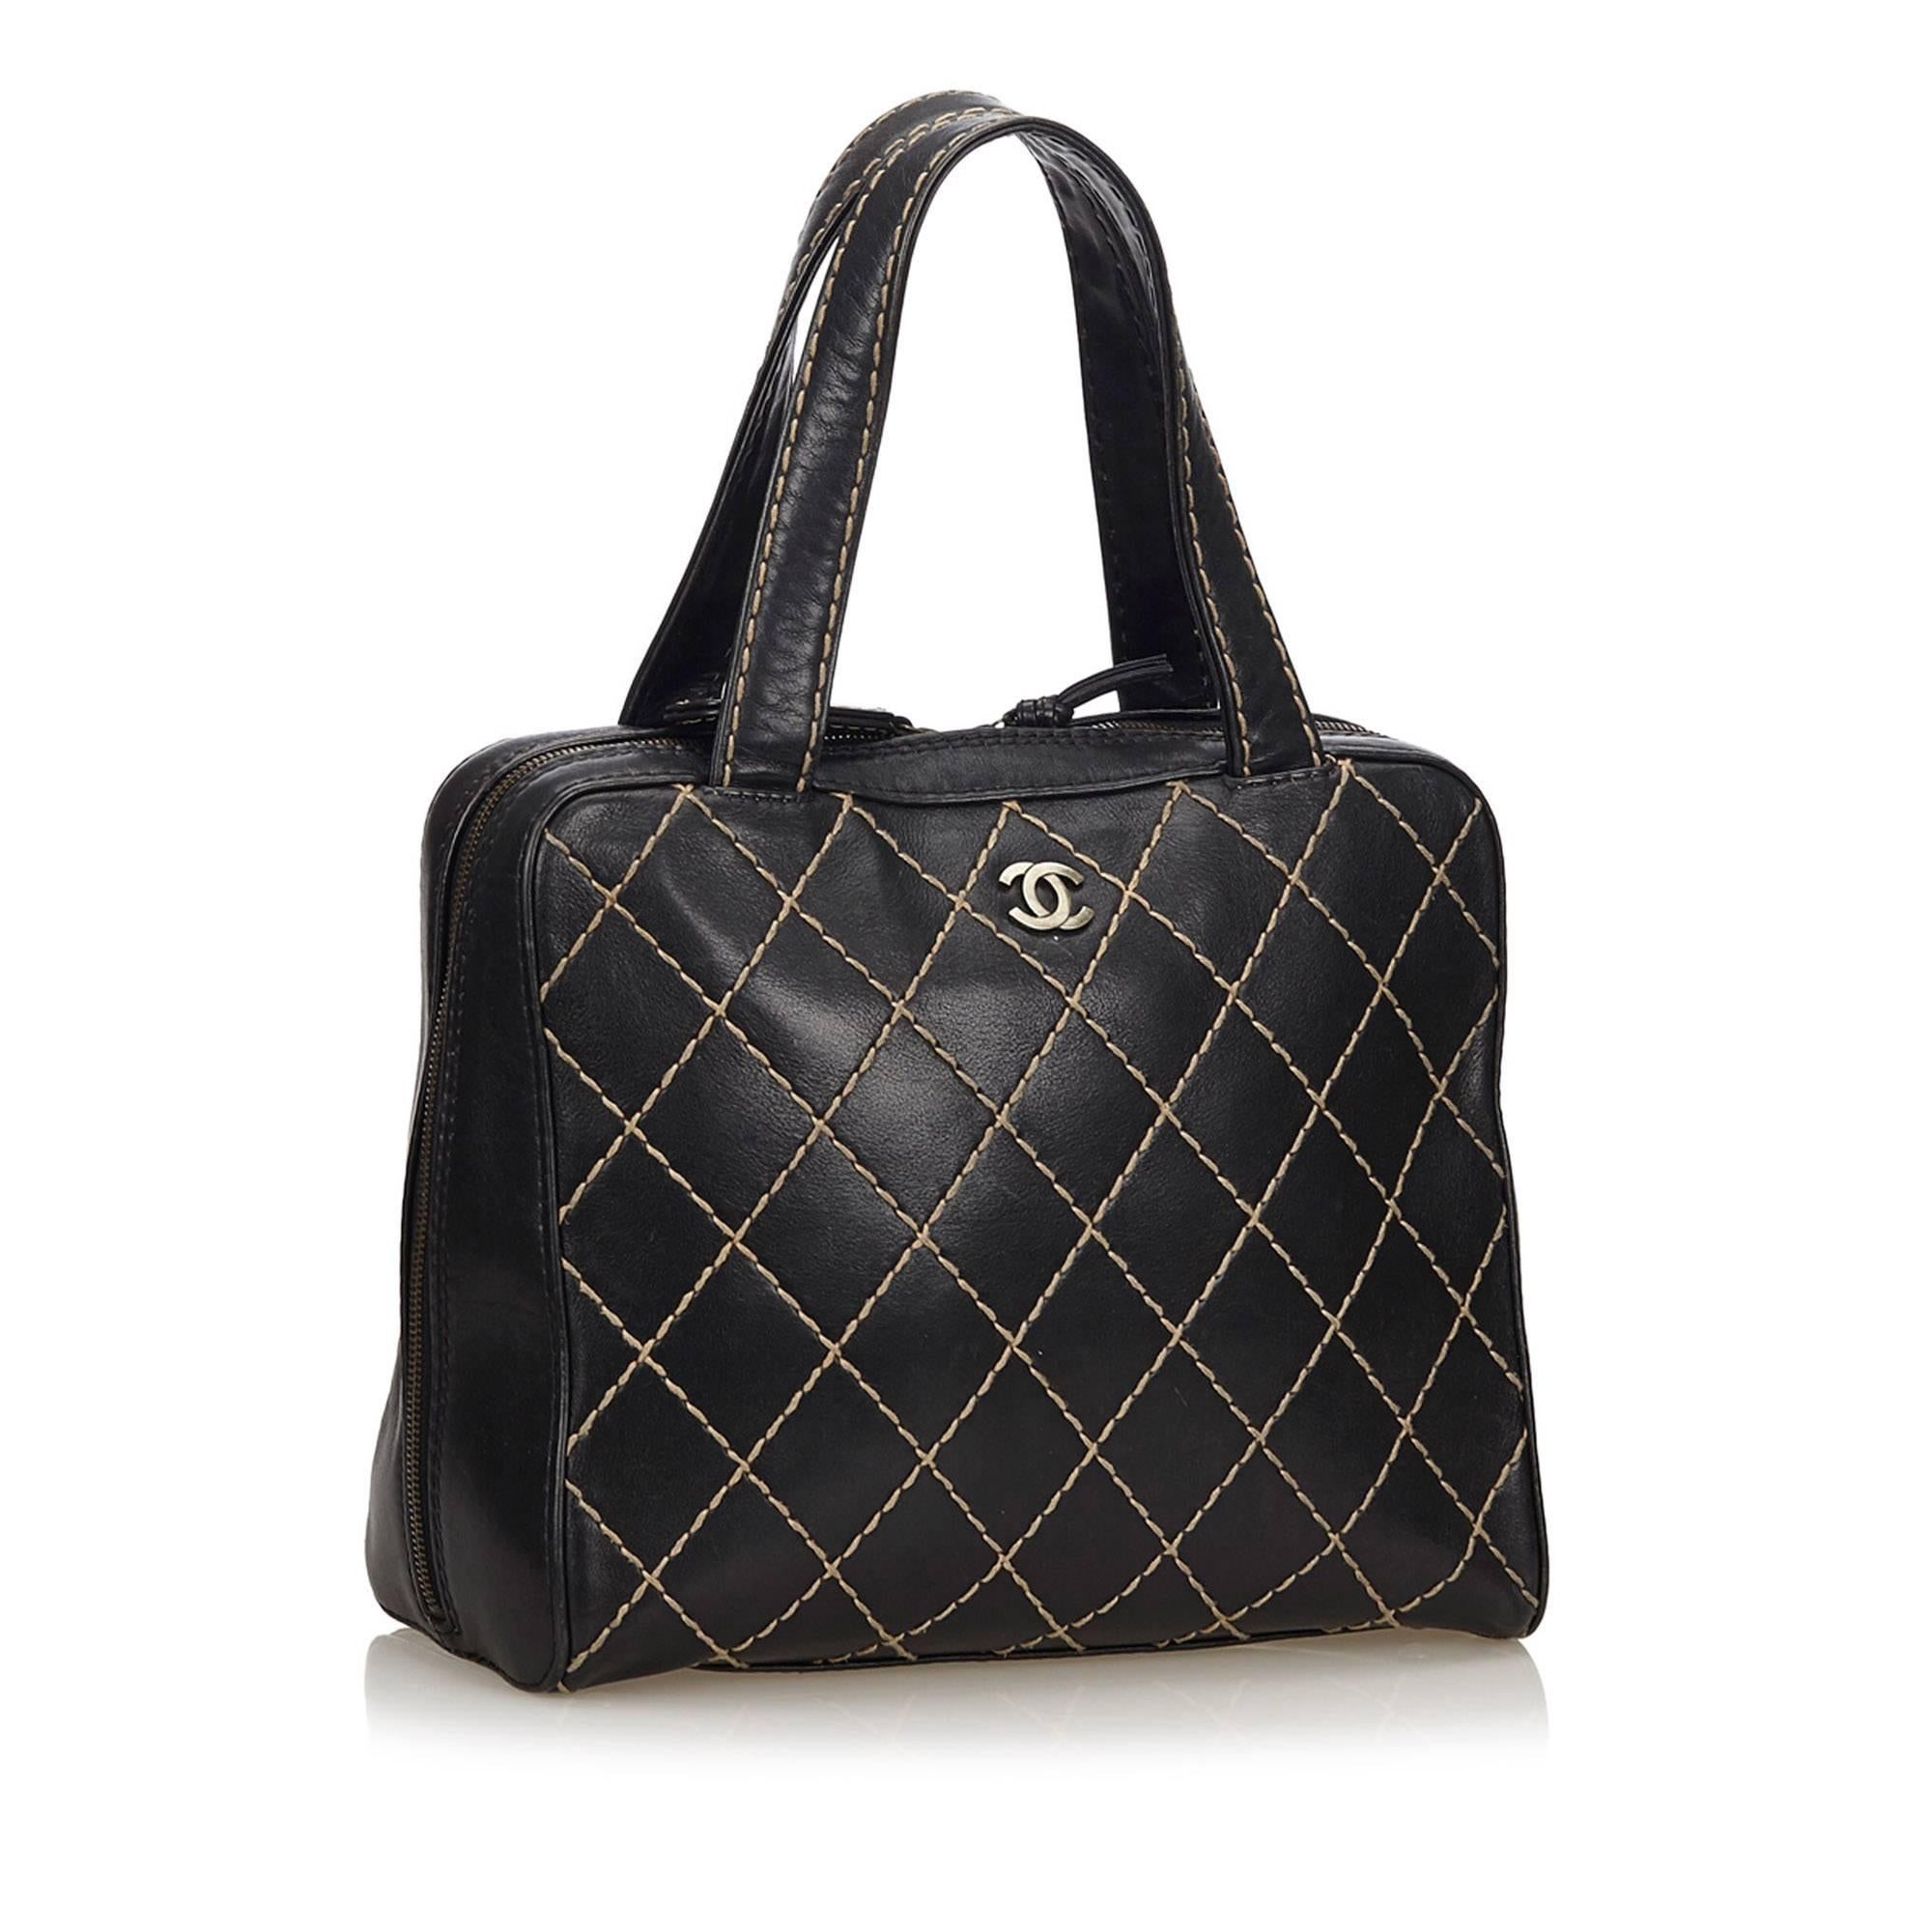 This handbag features a wild stitch quilted lambskin leather body, flat straps, exterior back slip pocket, a zip around closure, and an interior zip and slip pocket. 

It carries a B condition rating.

Dimensions: 
Length 31 cm
Width 25 cm
Depth 14